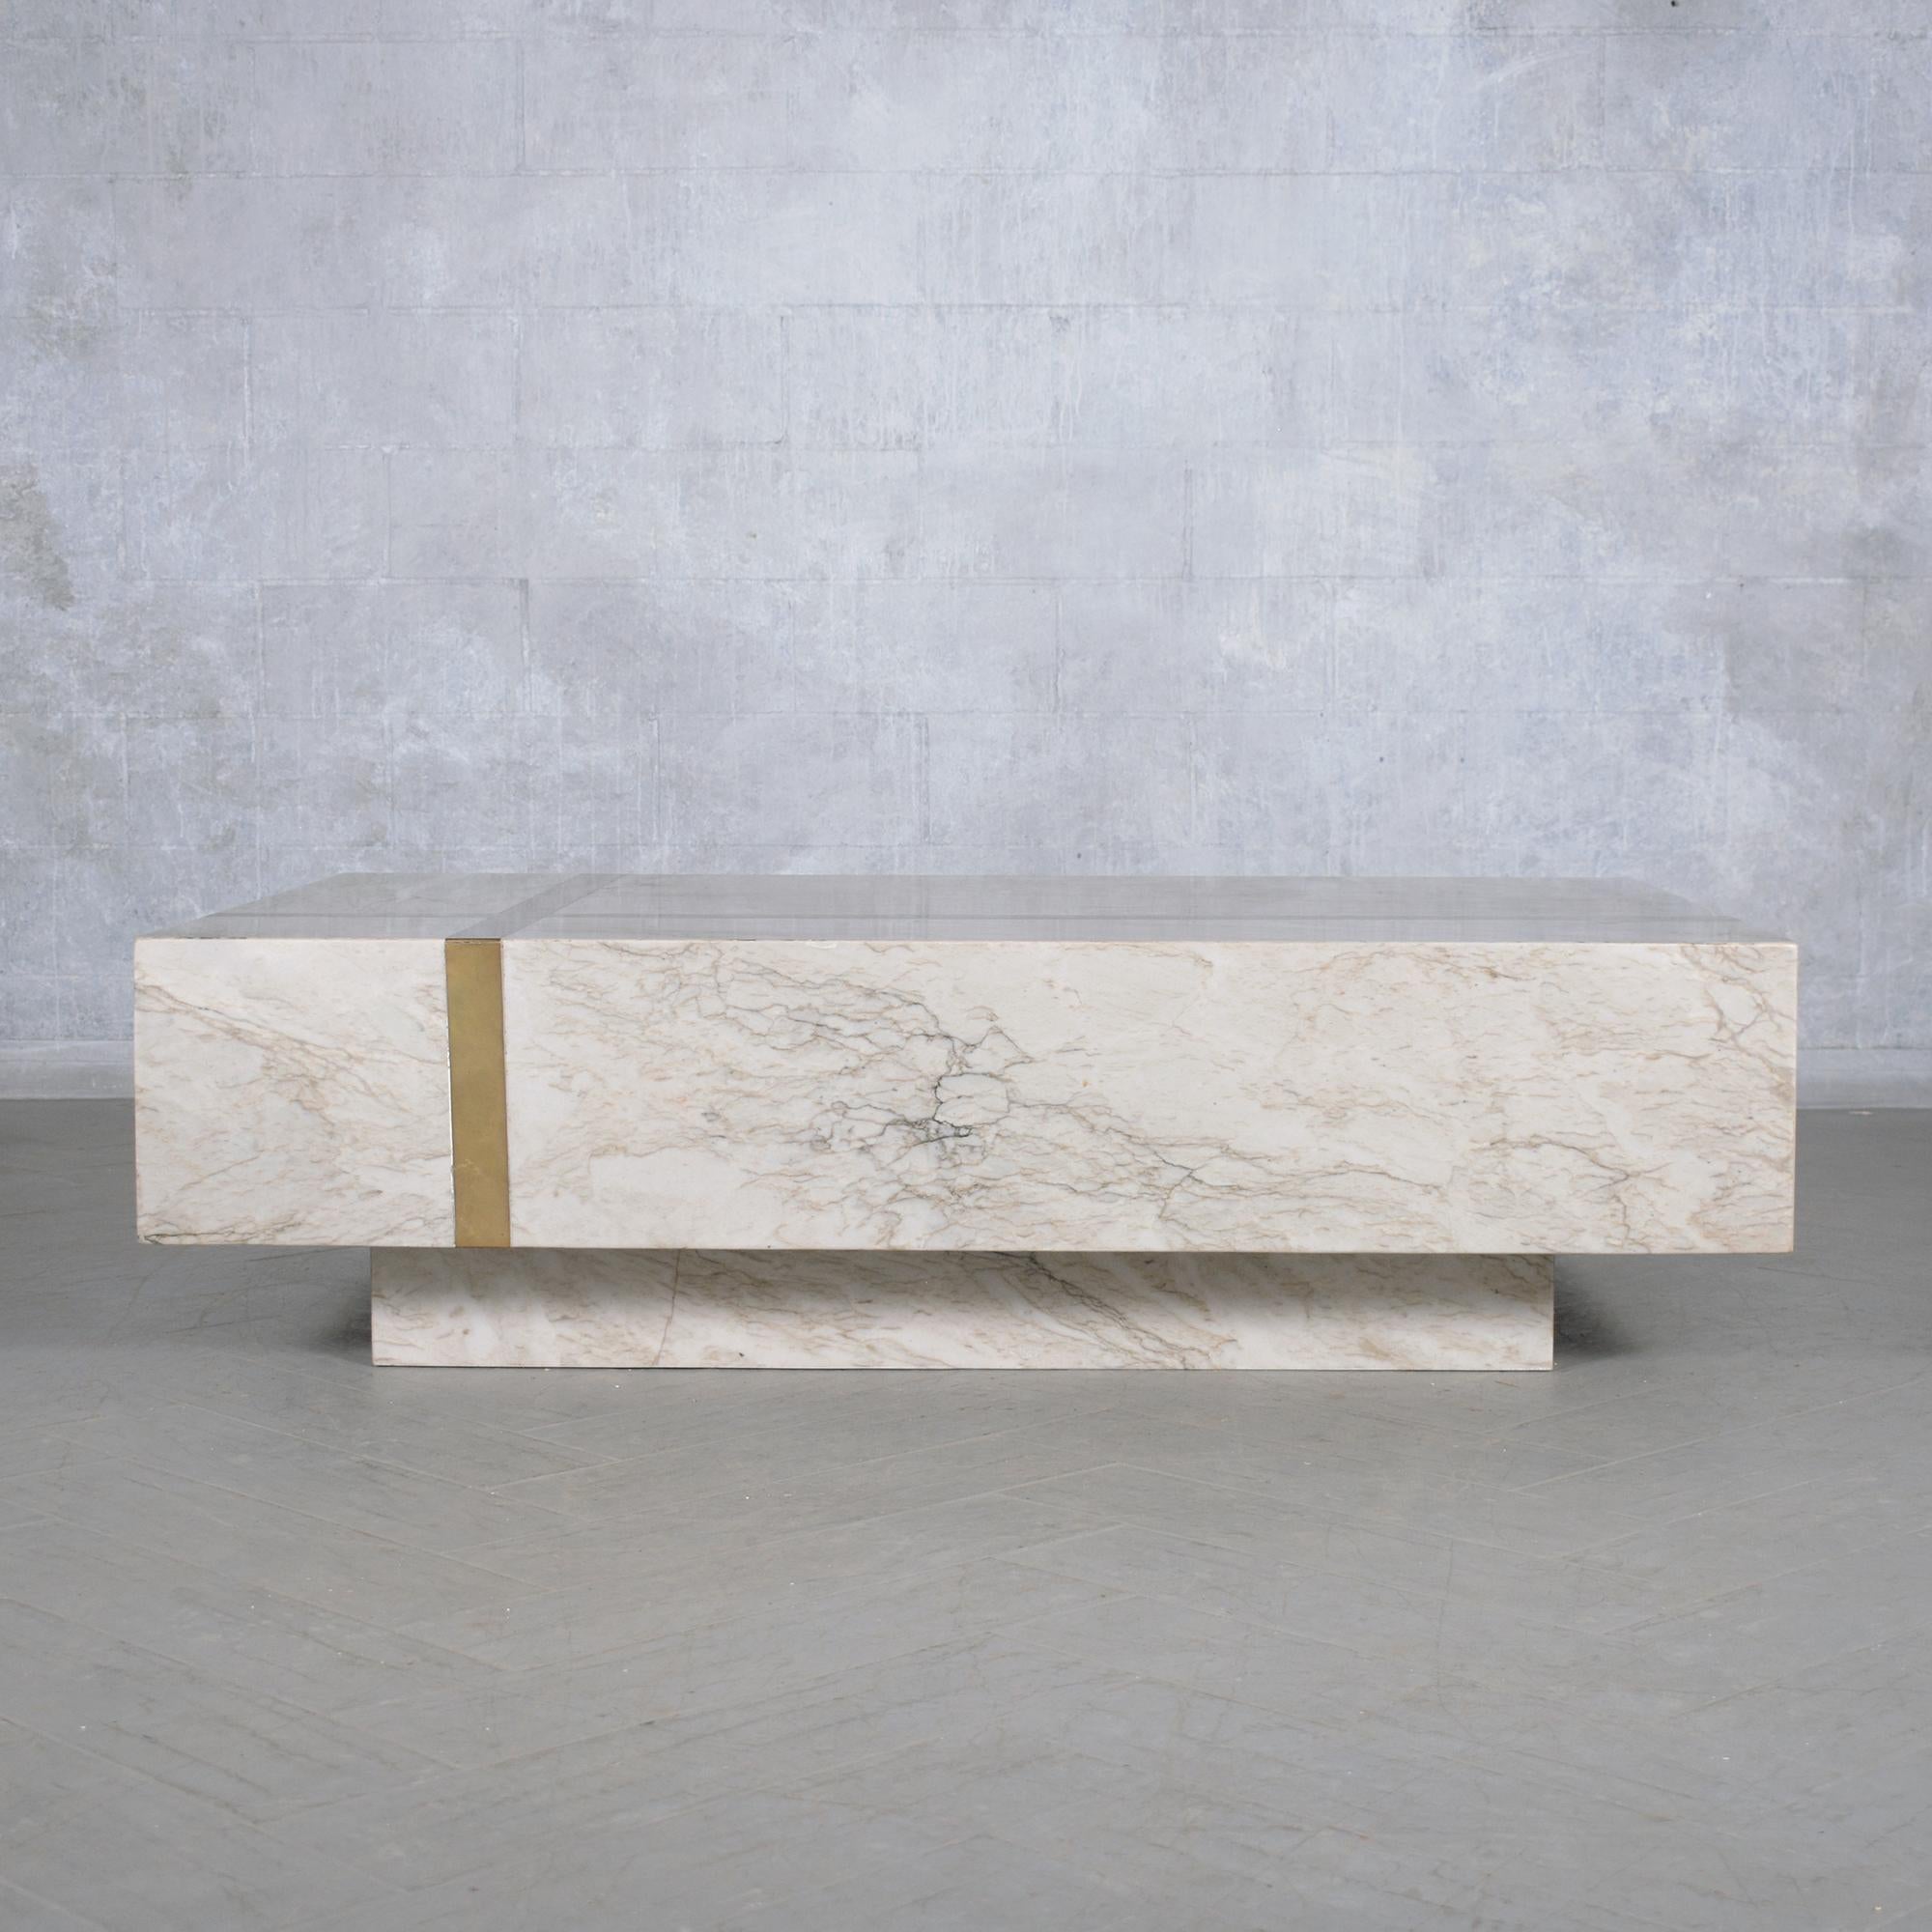 Explore the refined beauty of our Italian marble cocktail table, masterfully restored by our skilled craftsmen to showcase its original magnificence. This exquisite table features a large square tabletop that embodies the classic principles of